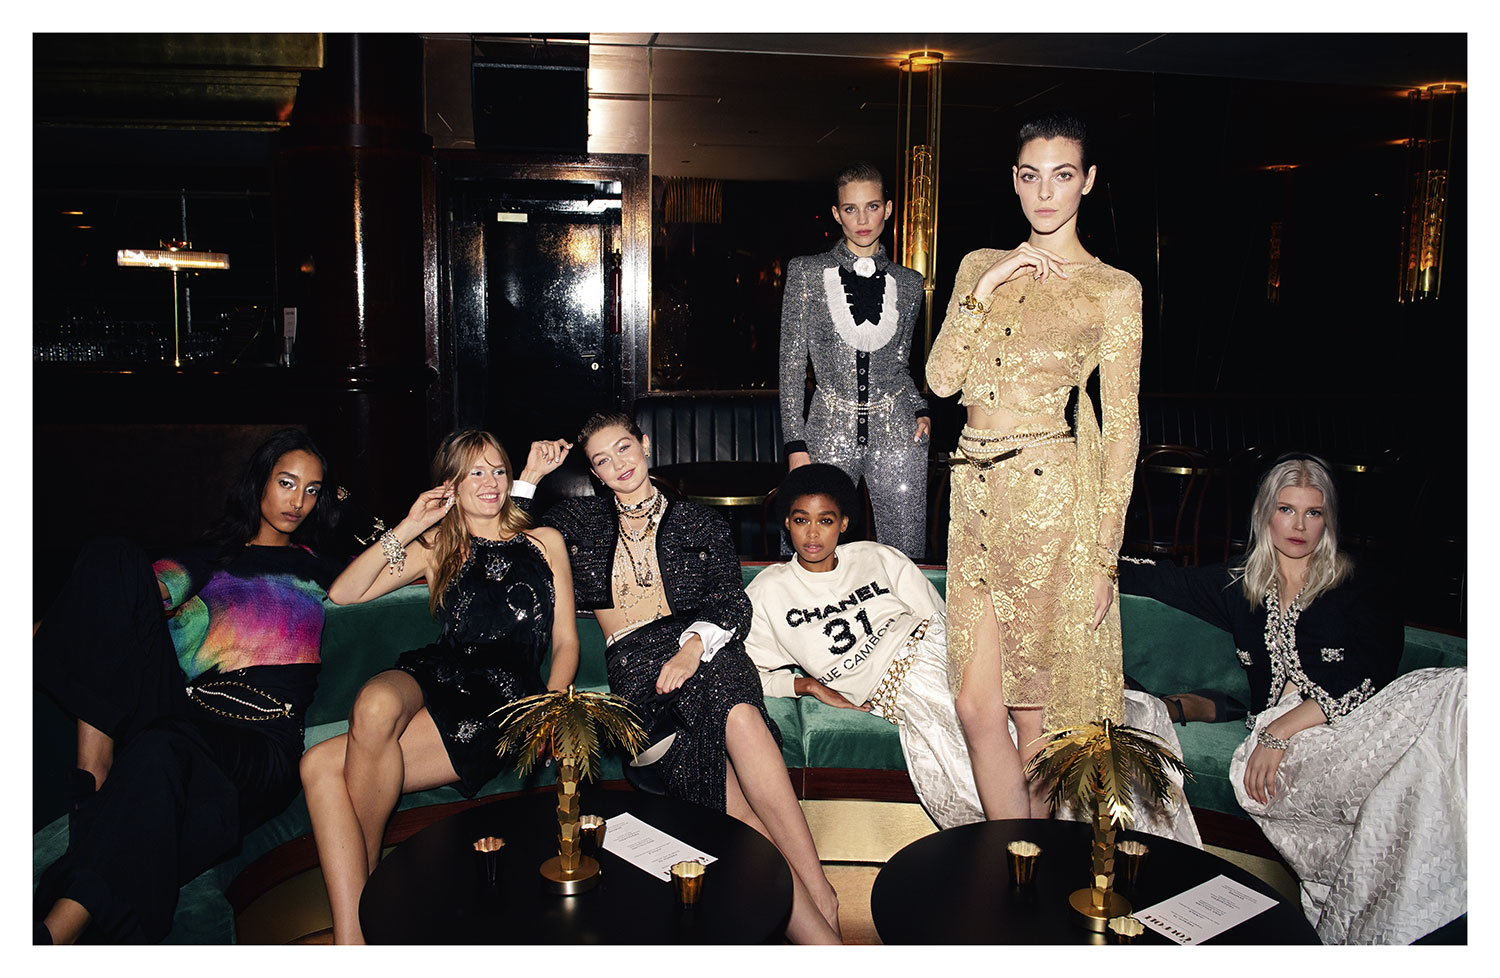 Dinner And Soirée. An Exclusive Look At Chanel's Métiers D'Art Show And ...